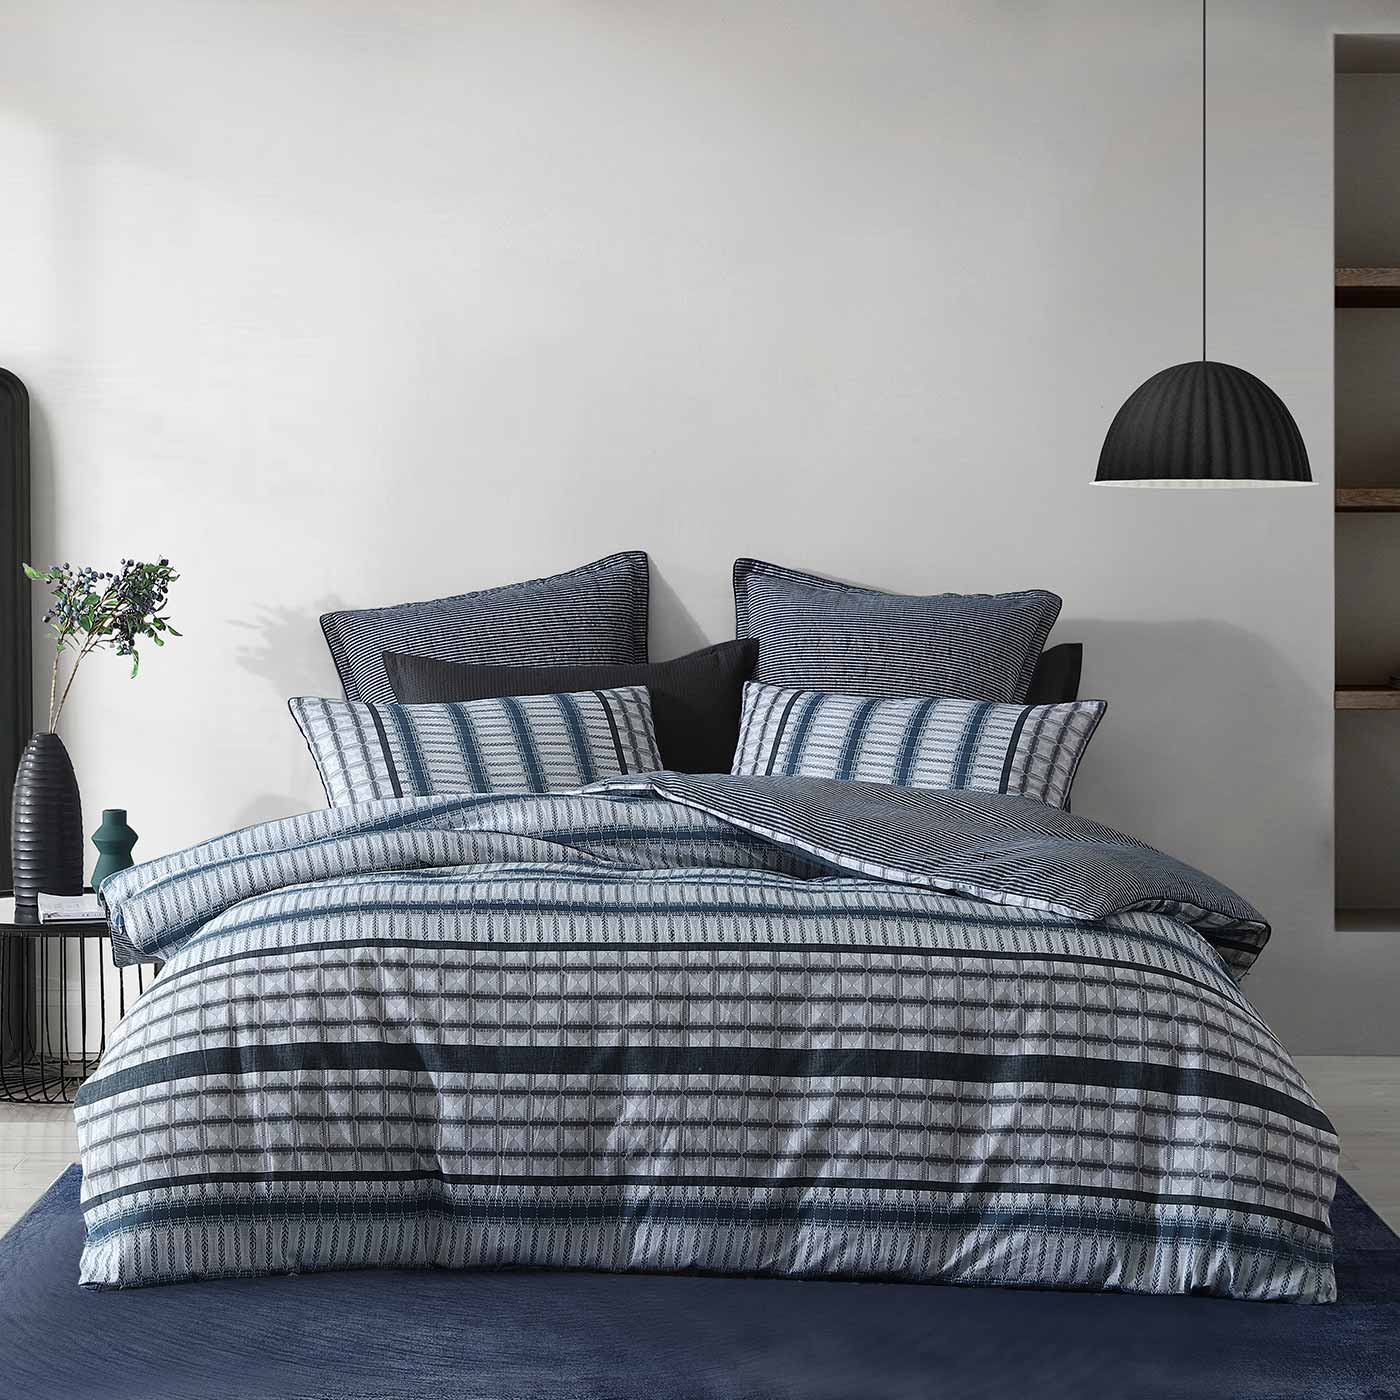 Experience a modern, contemporary look with the Mason Indigo Quilt Cover Set. Featuring highly detailed geometric patterns in shades of indigo and grey